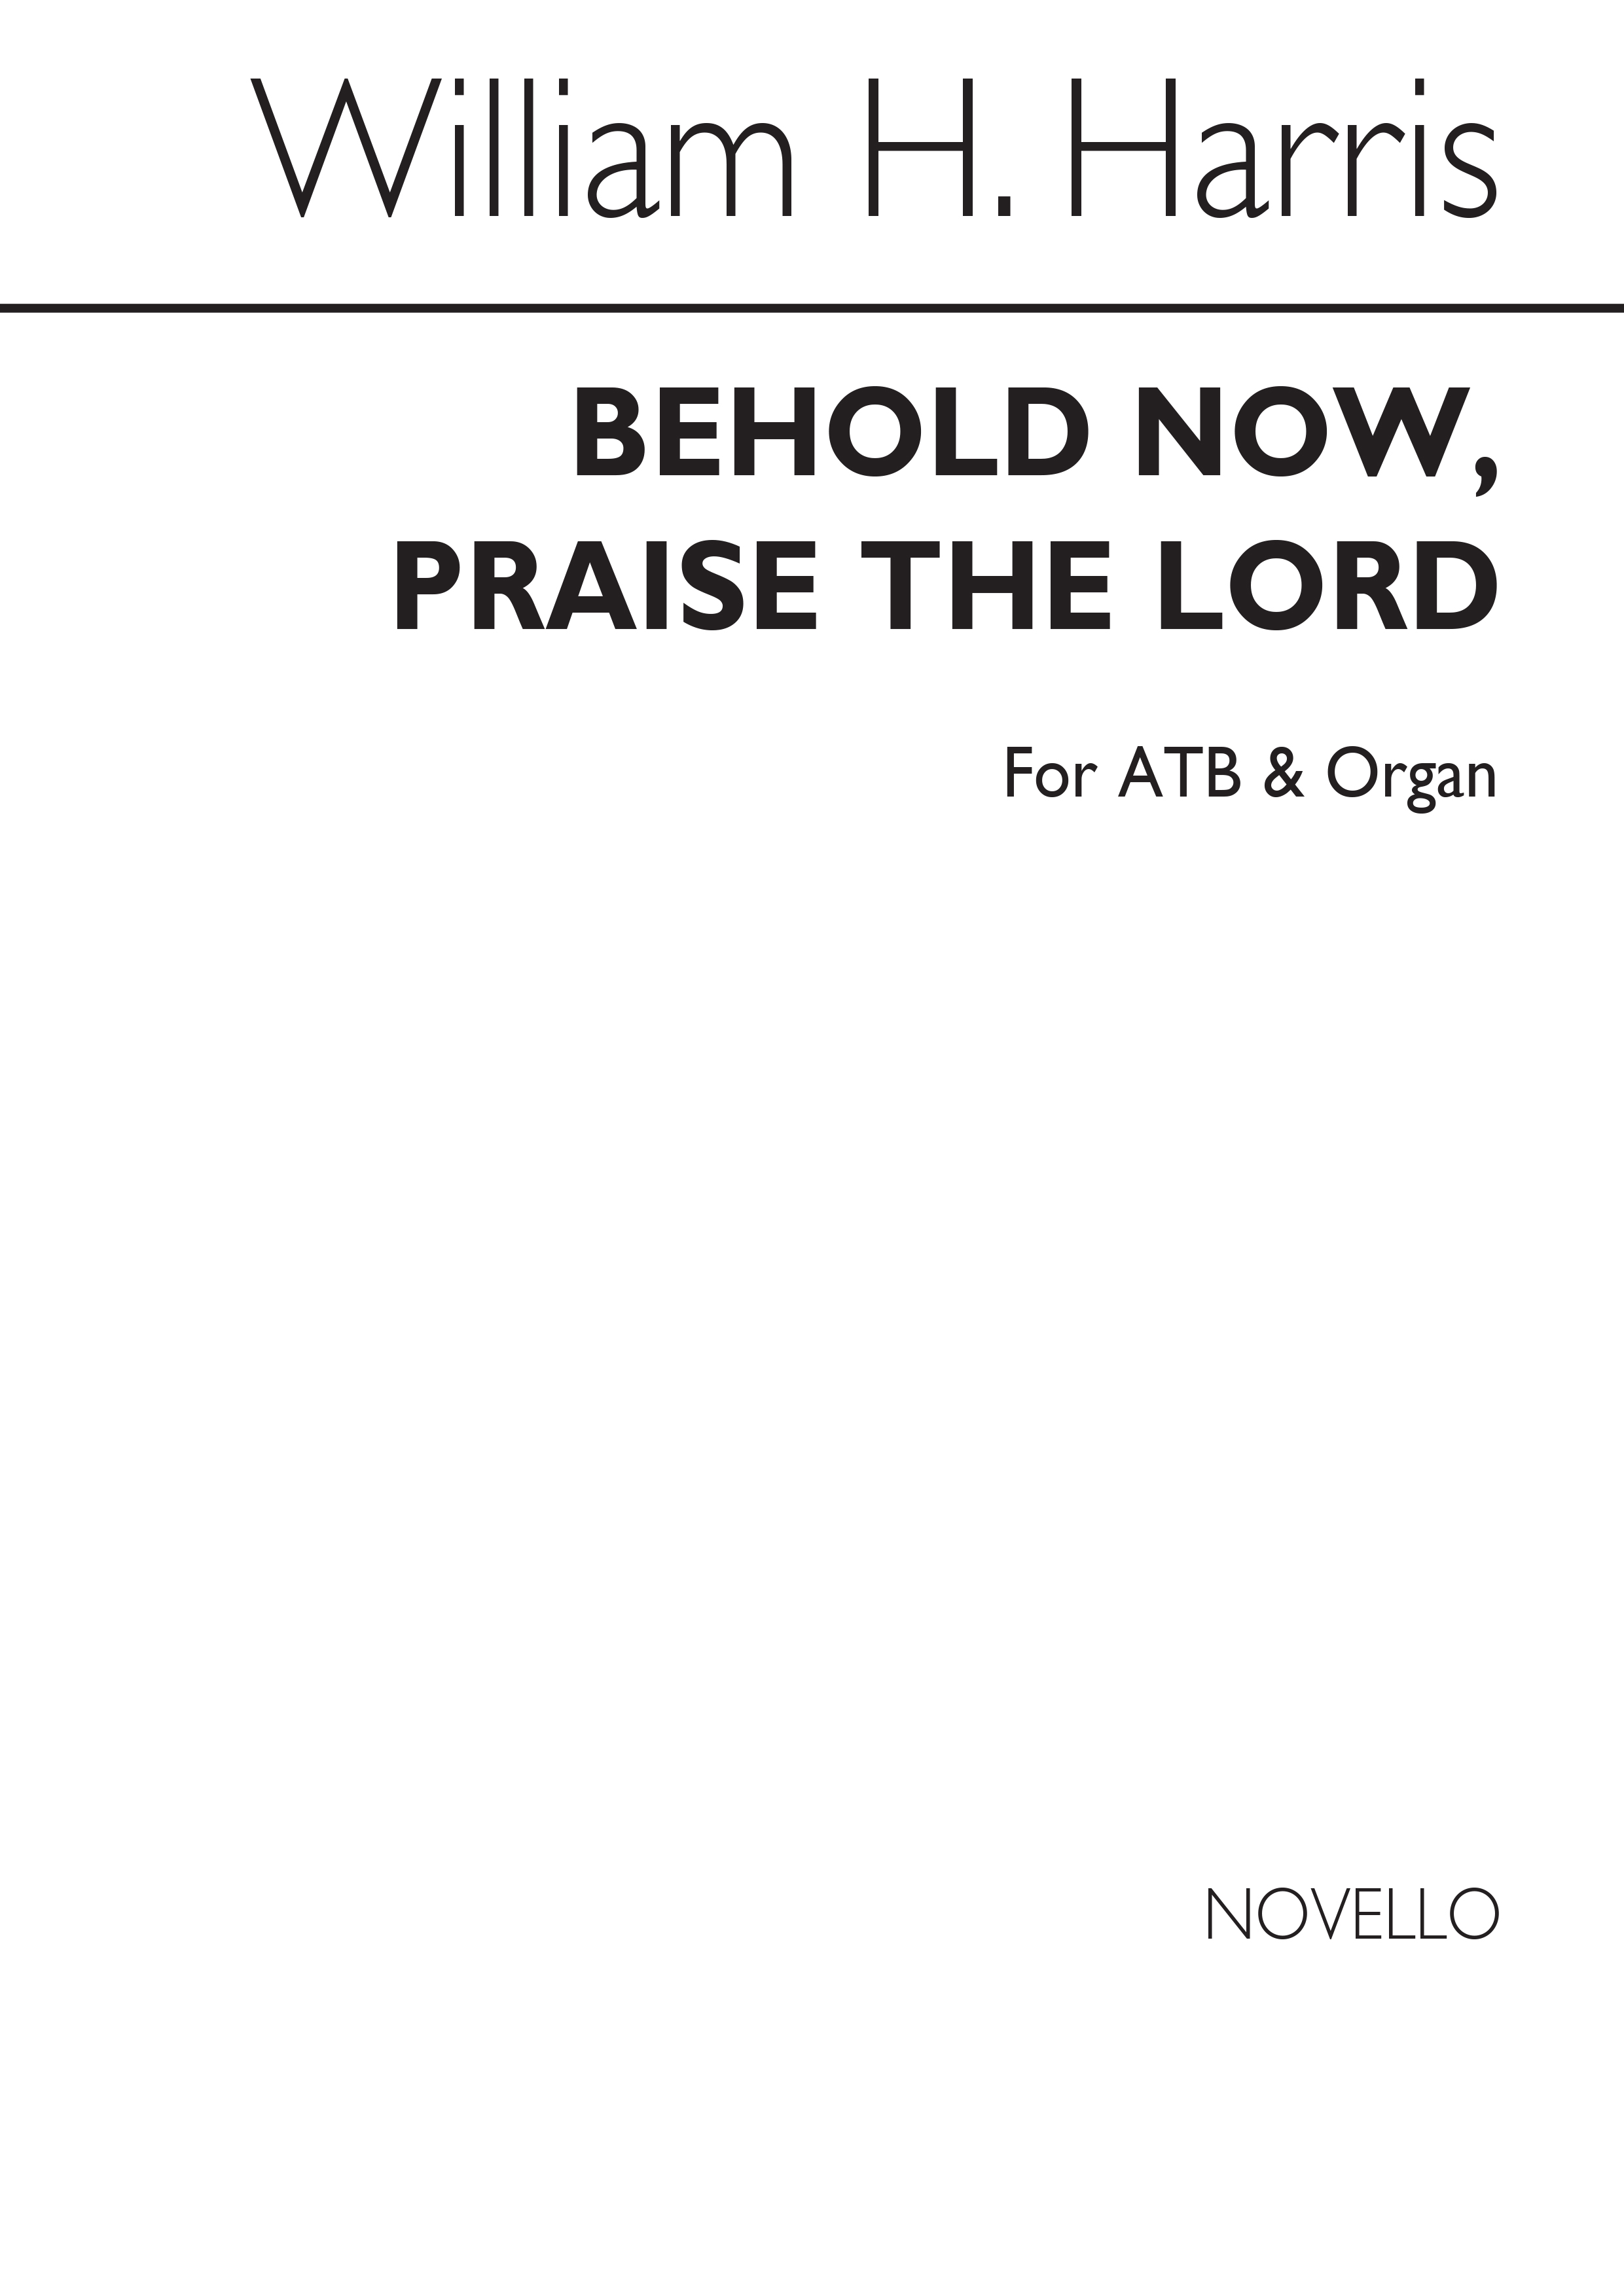 William H. Harris: Behold Now Praise The Lord (ATB/Organ)